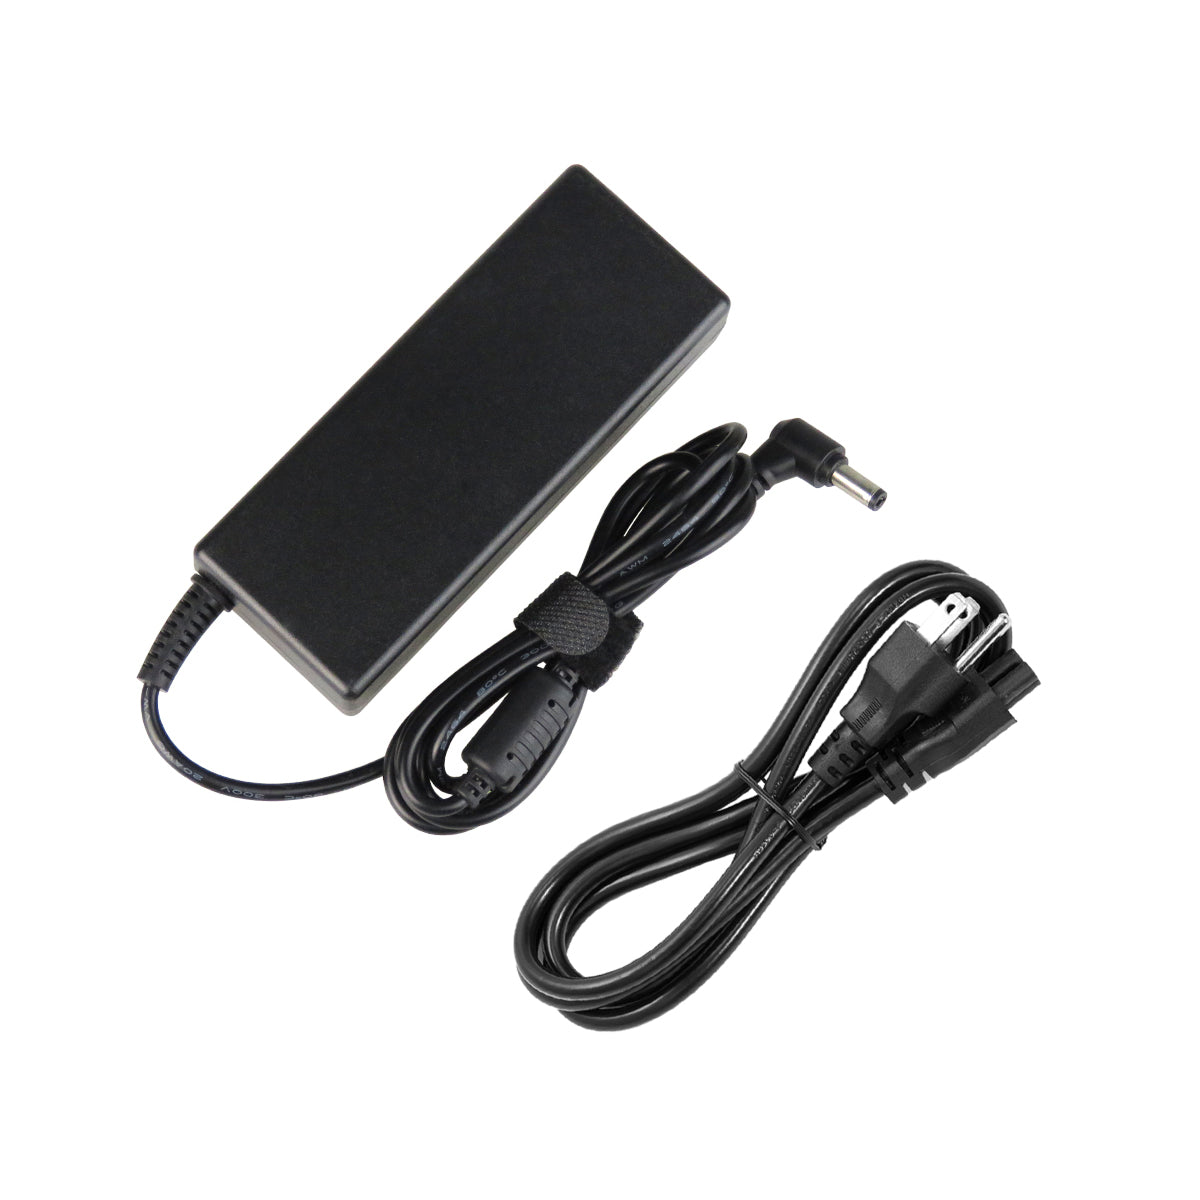 AC Adapter Charger for ASUS F83Se Notebook.